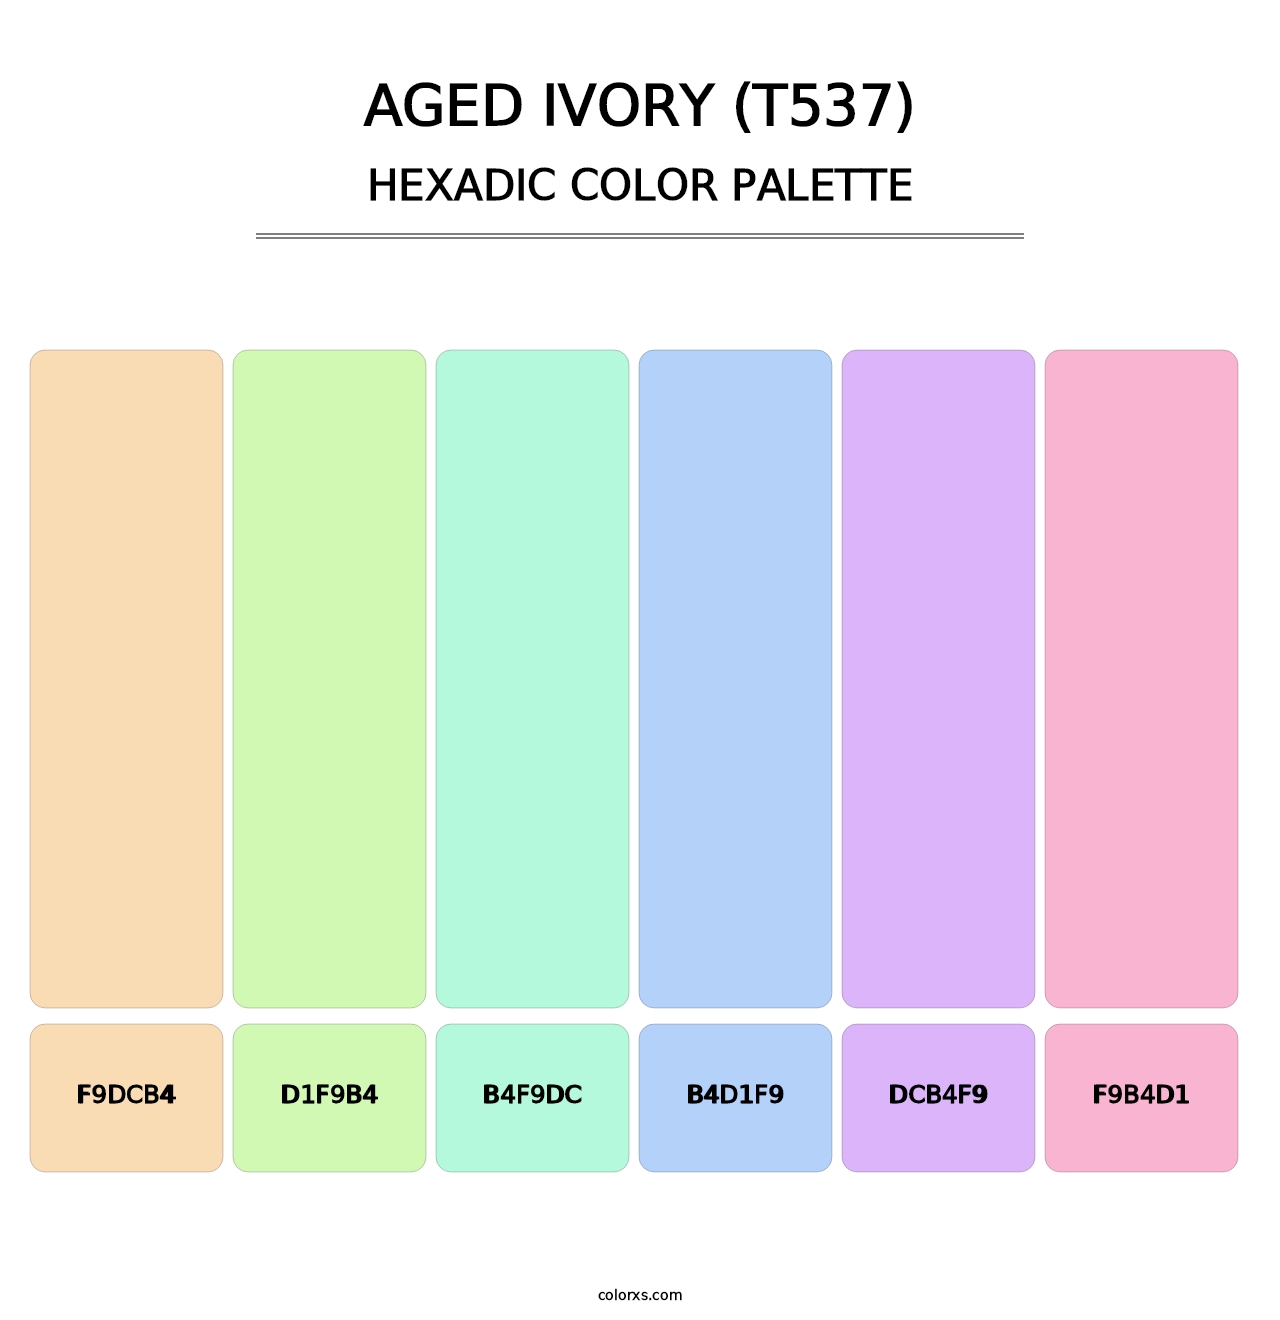 Aged Ivory (T537) - Hexadic Color Palette